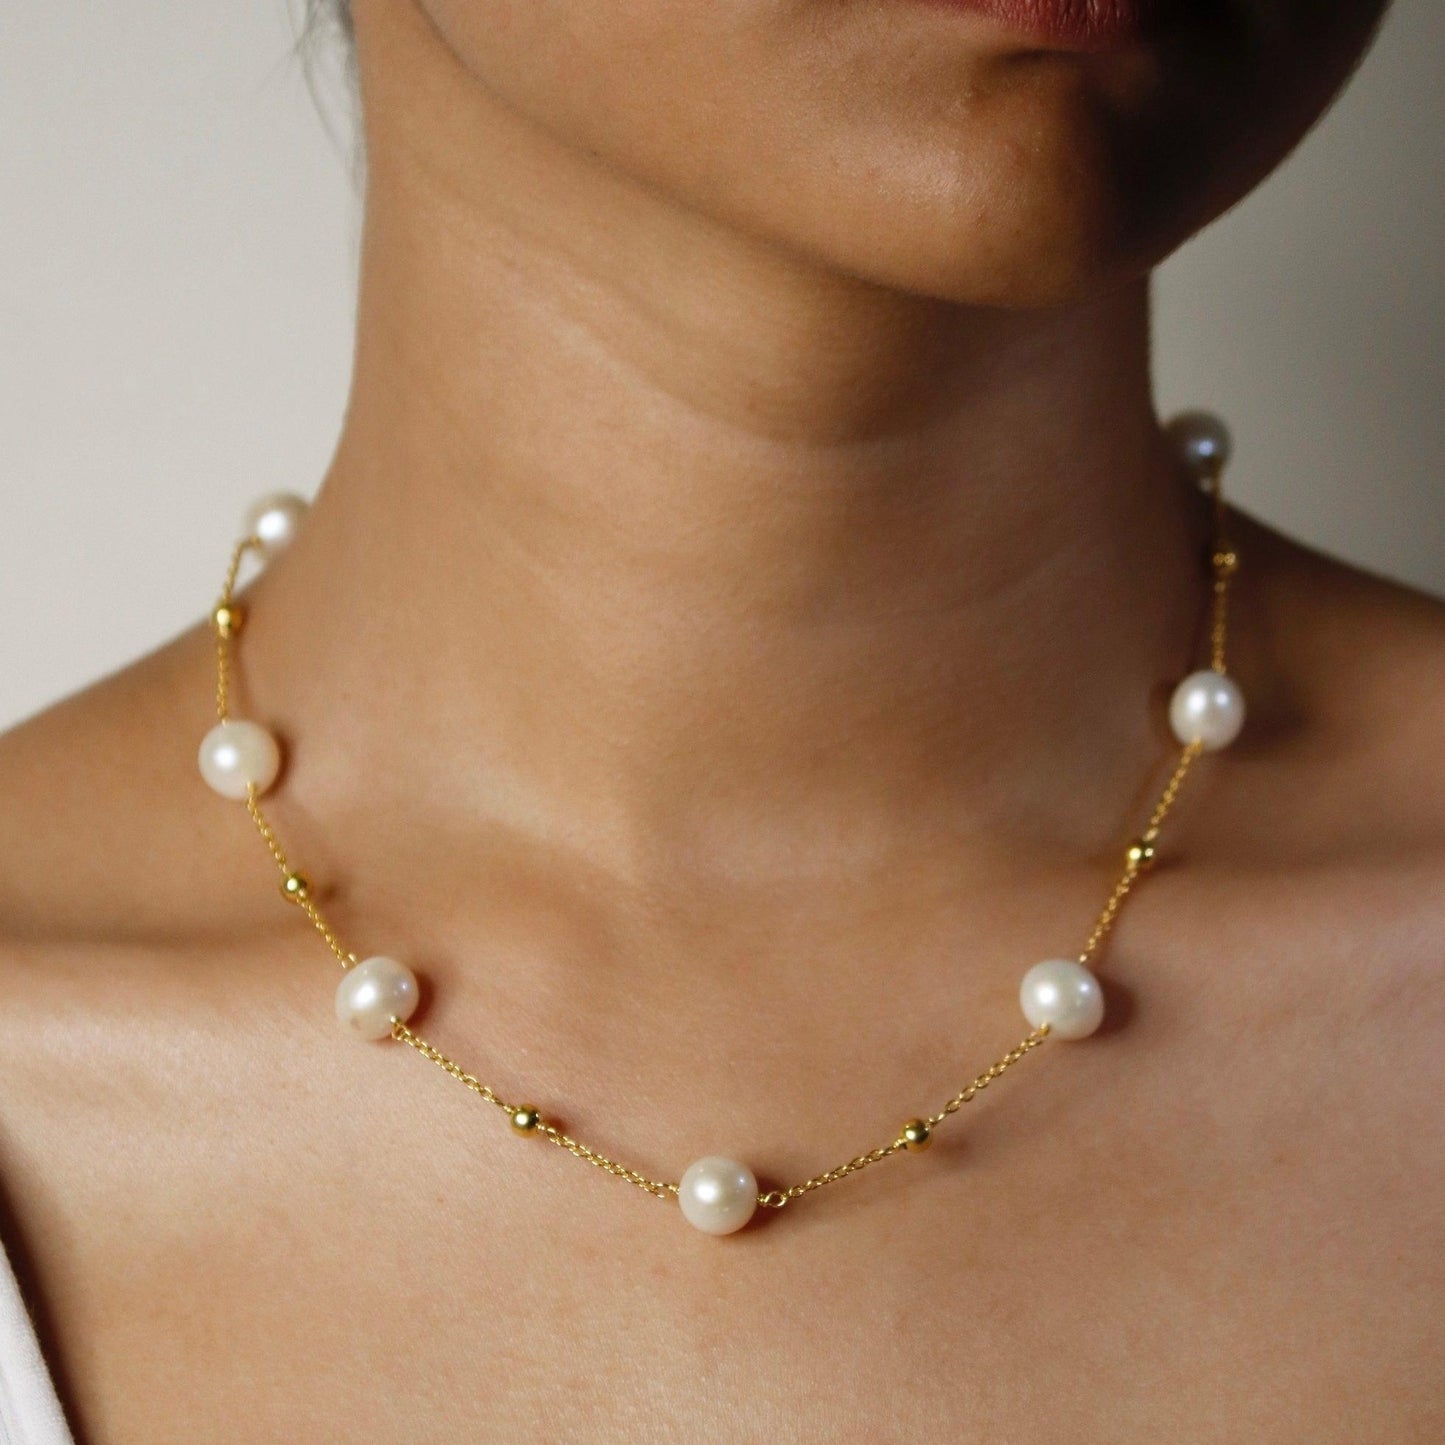 Natural Pearl Beaded Silver Balls Necklace/ 18kt Gold Plated - From Purl Purl